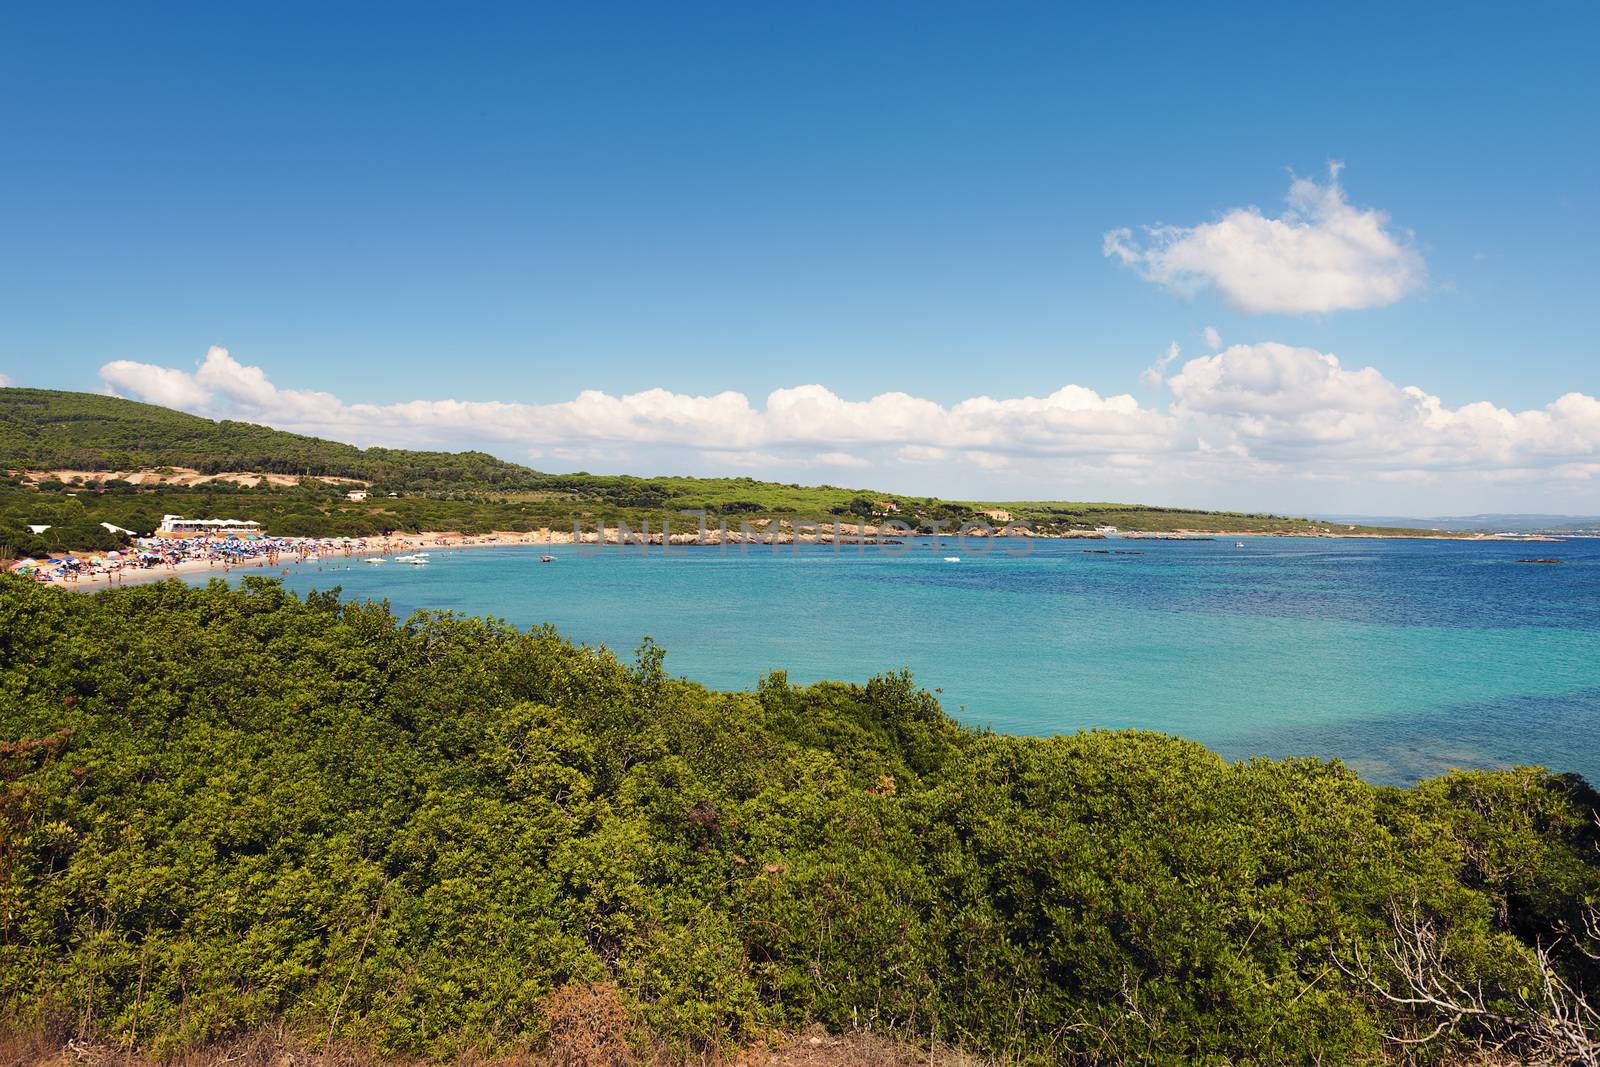 panoramic of the beach of Lazzaretto in Alghero, Sardinia, Italy. turquoise water bay surrounded by vegetation